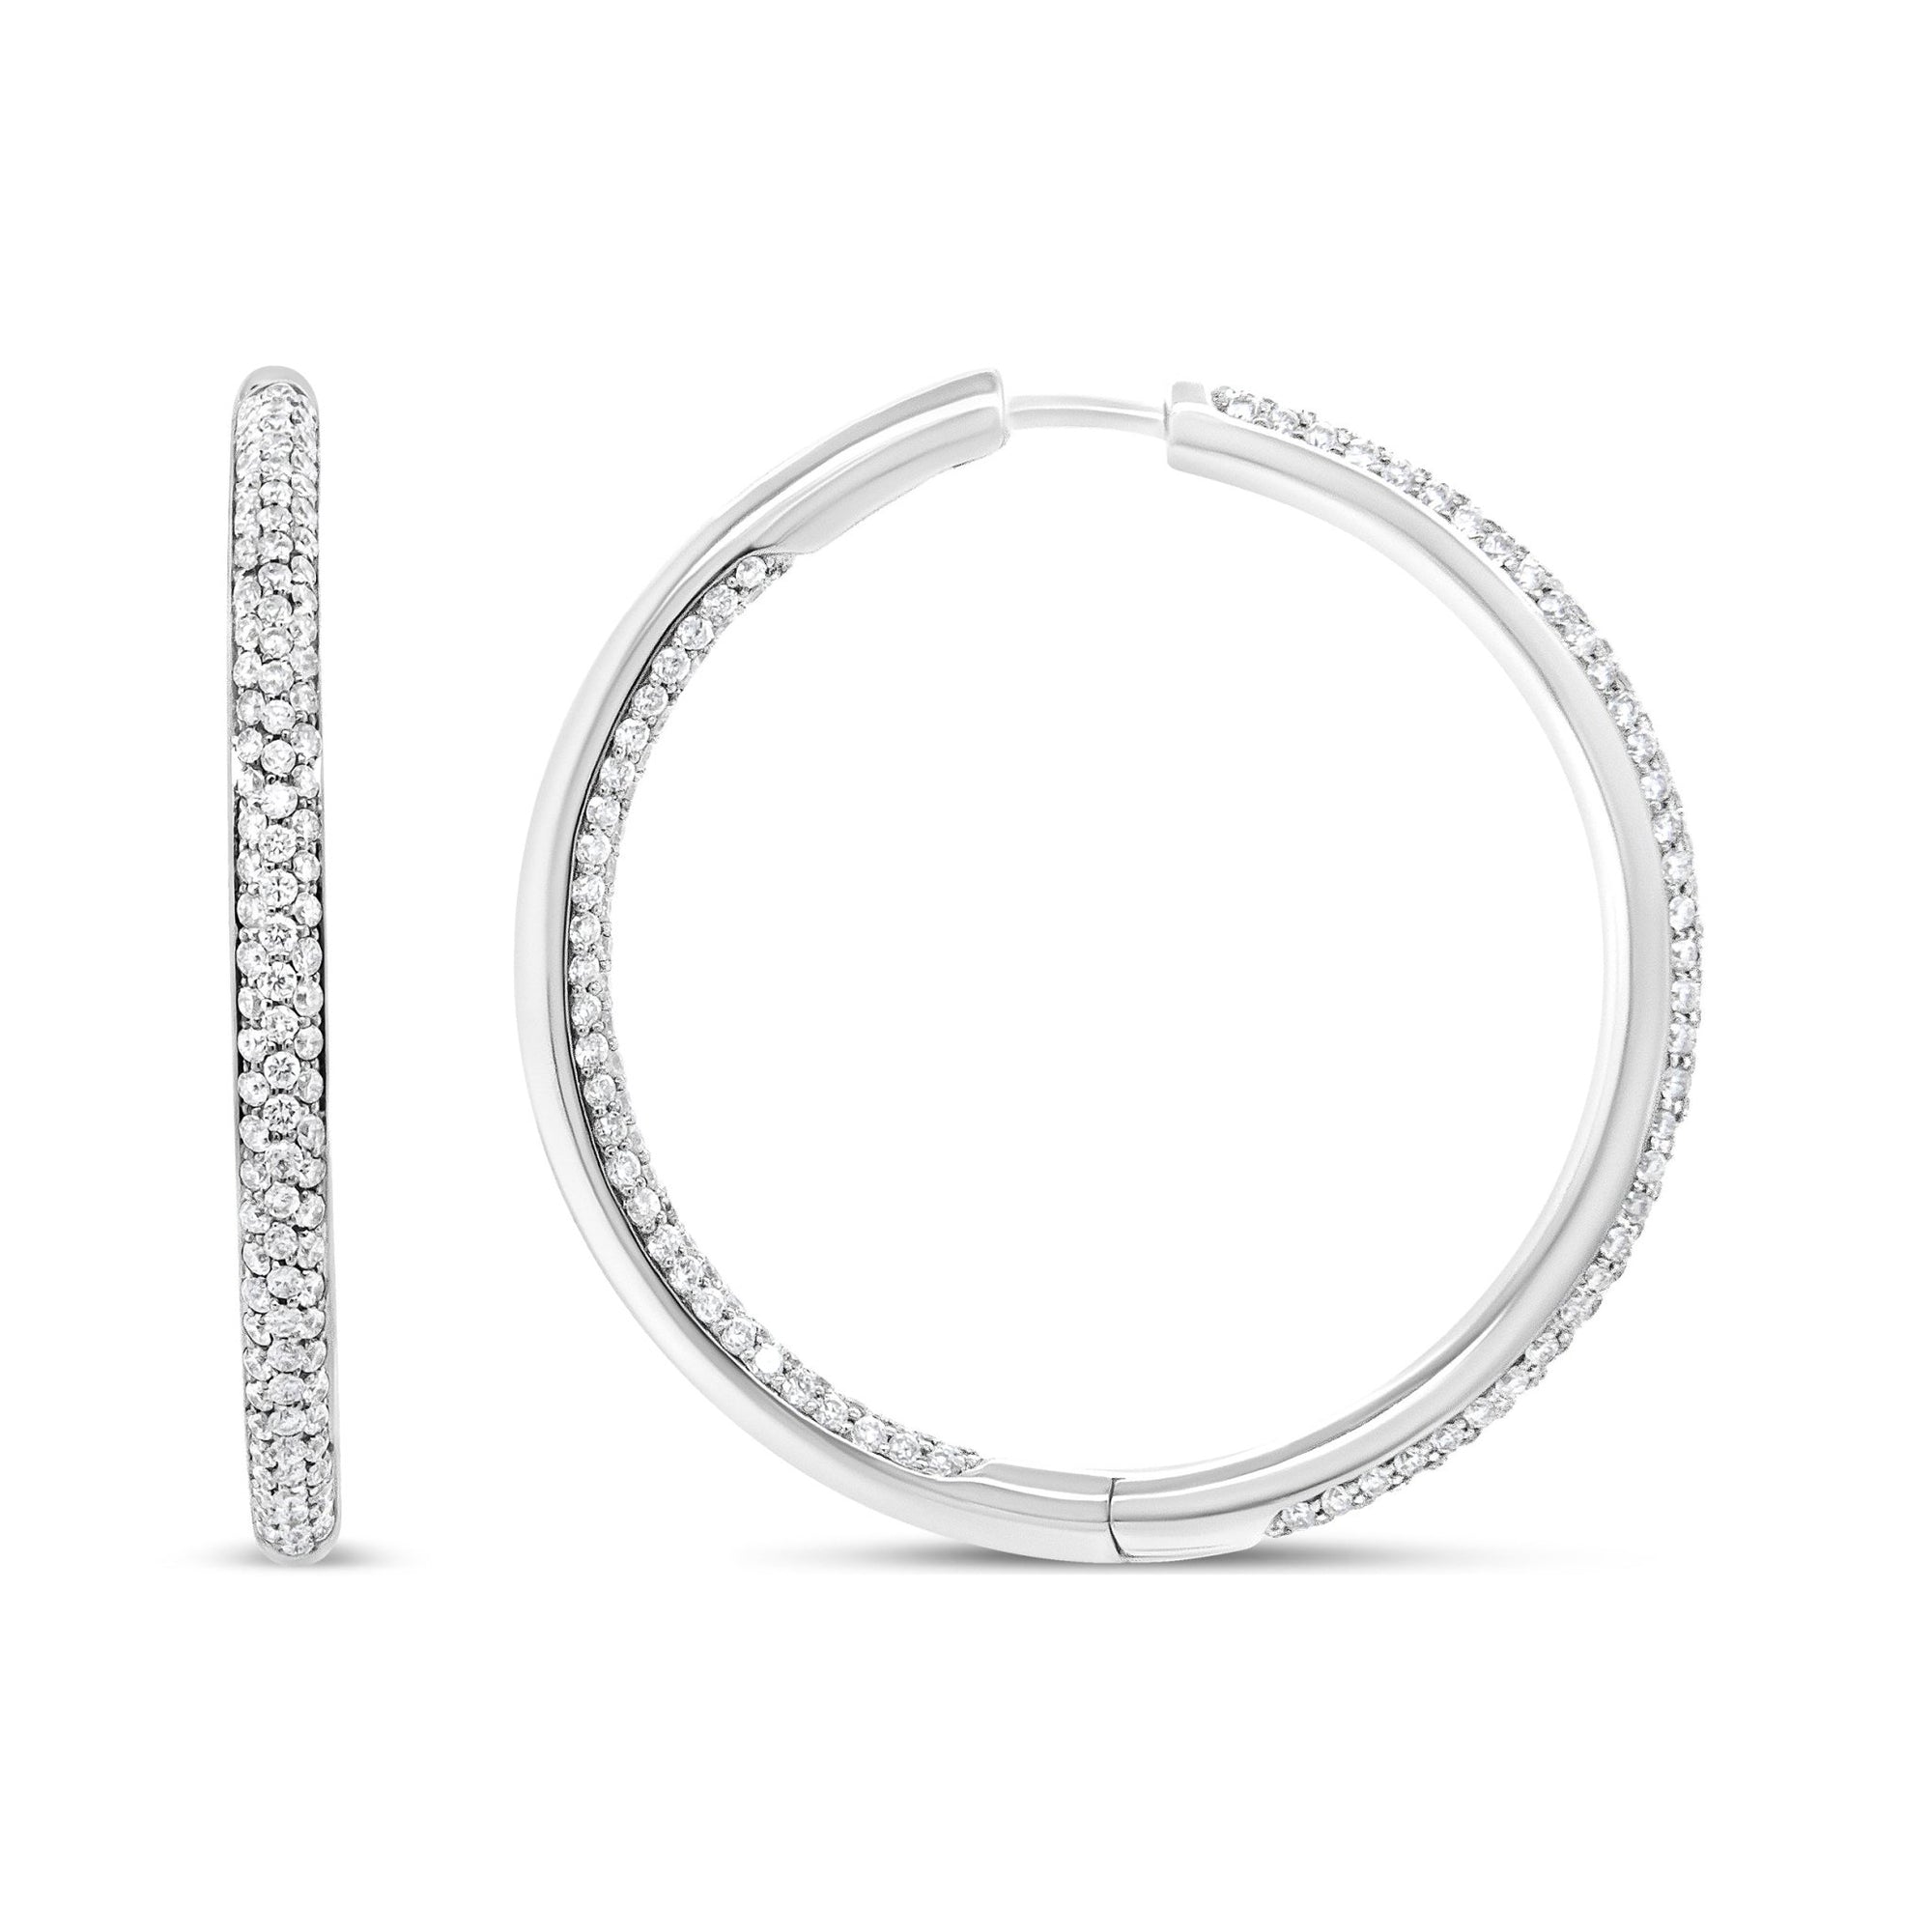 18K White Gold 2.00 Cttw Round-Cut Diamond Inner-Outer Hoop Earrings (F-G Color, VS1-VS2 Clarity) - LinkagejewelrydesignLinkagejewelrydesign